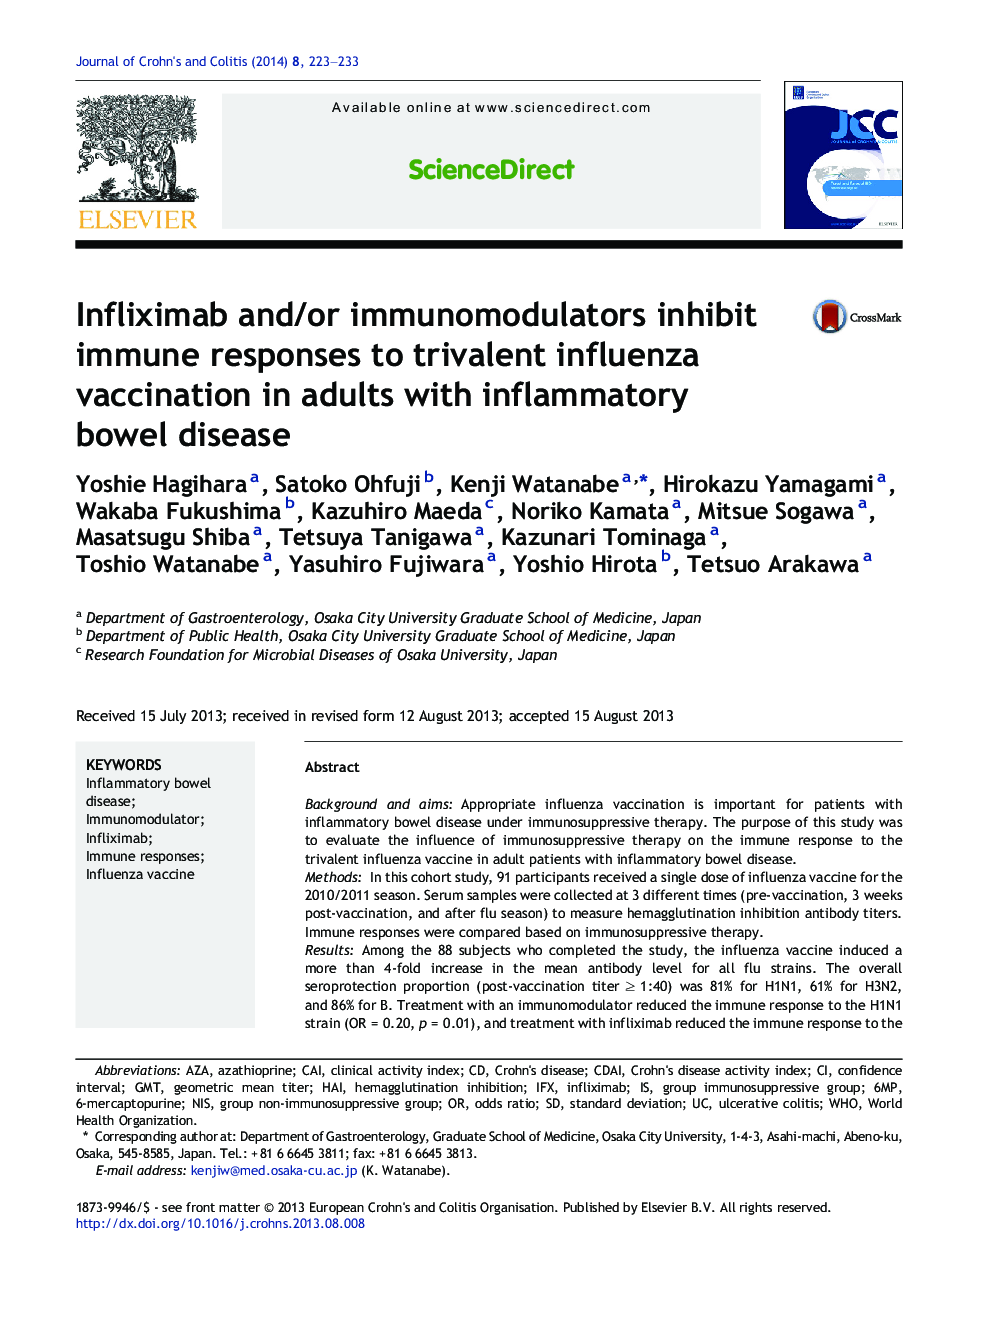 Infliximab and/or immunomodulators inhibit immune responses to trivalent influenza vaccination in adults with inflammatory bowel disease